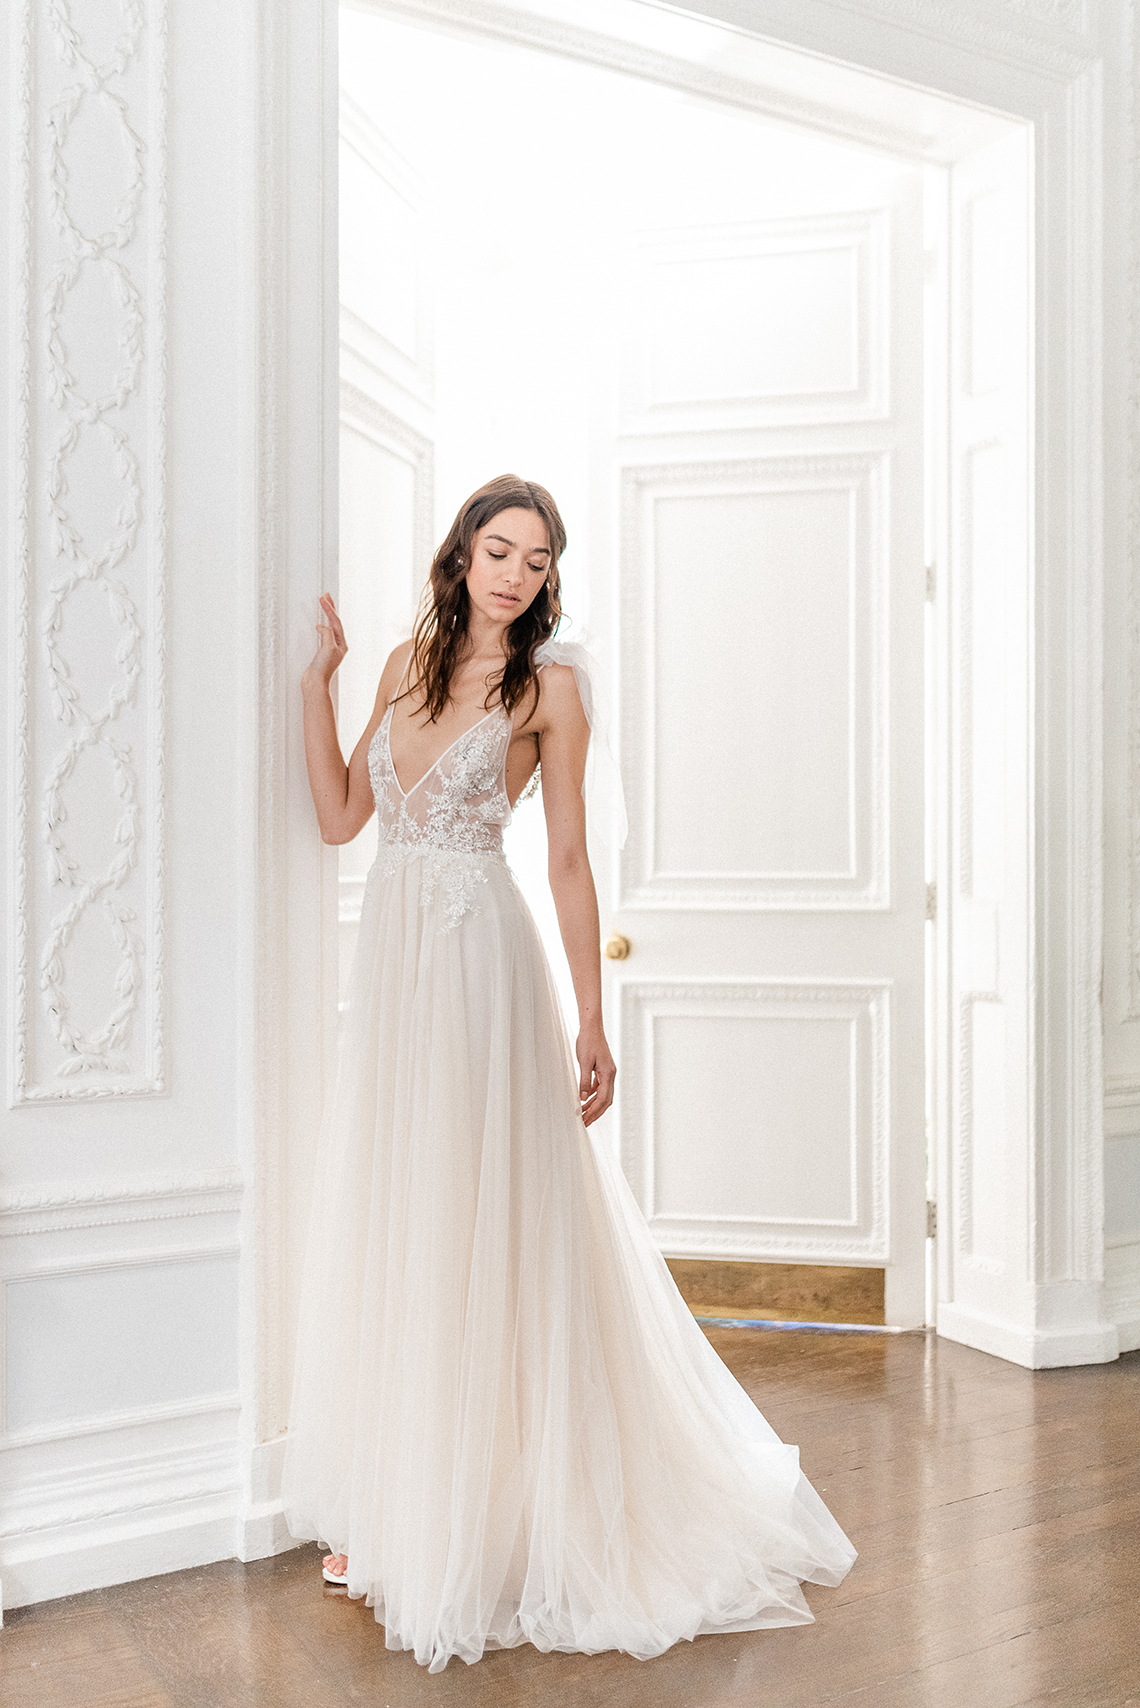 Luxurious and Opulent Wedding Inspiration Featuring Six Stunning Dresses – Gianluca and Mary Adovasio – Tigerlily Weddings 41